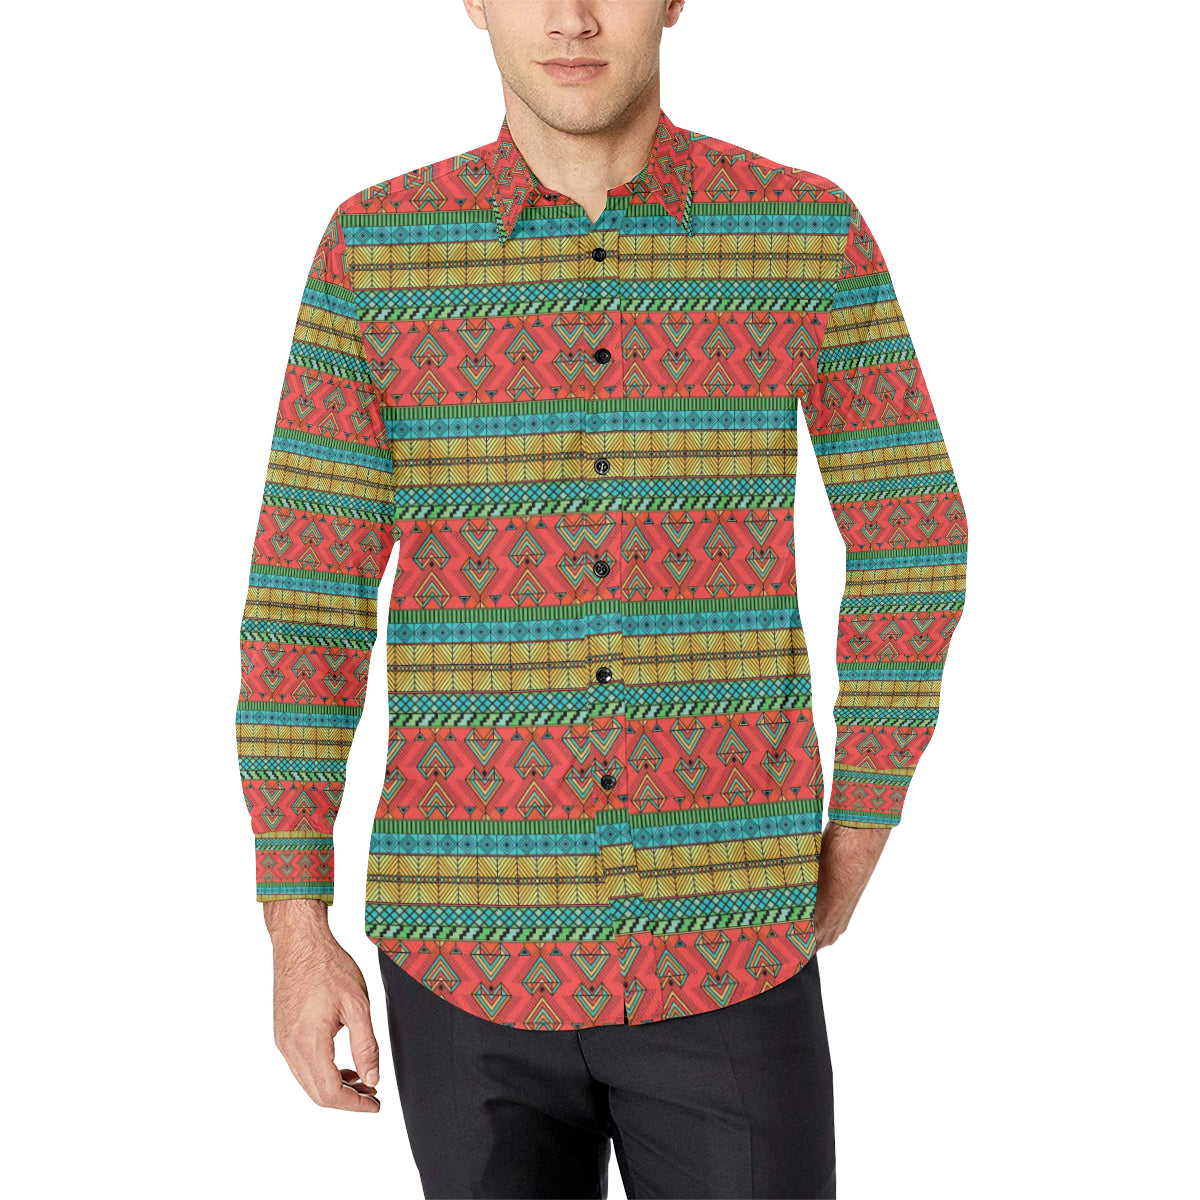 African Colorful Zigzag Print Pattern Men's Long Sleeve Shirt